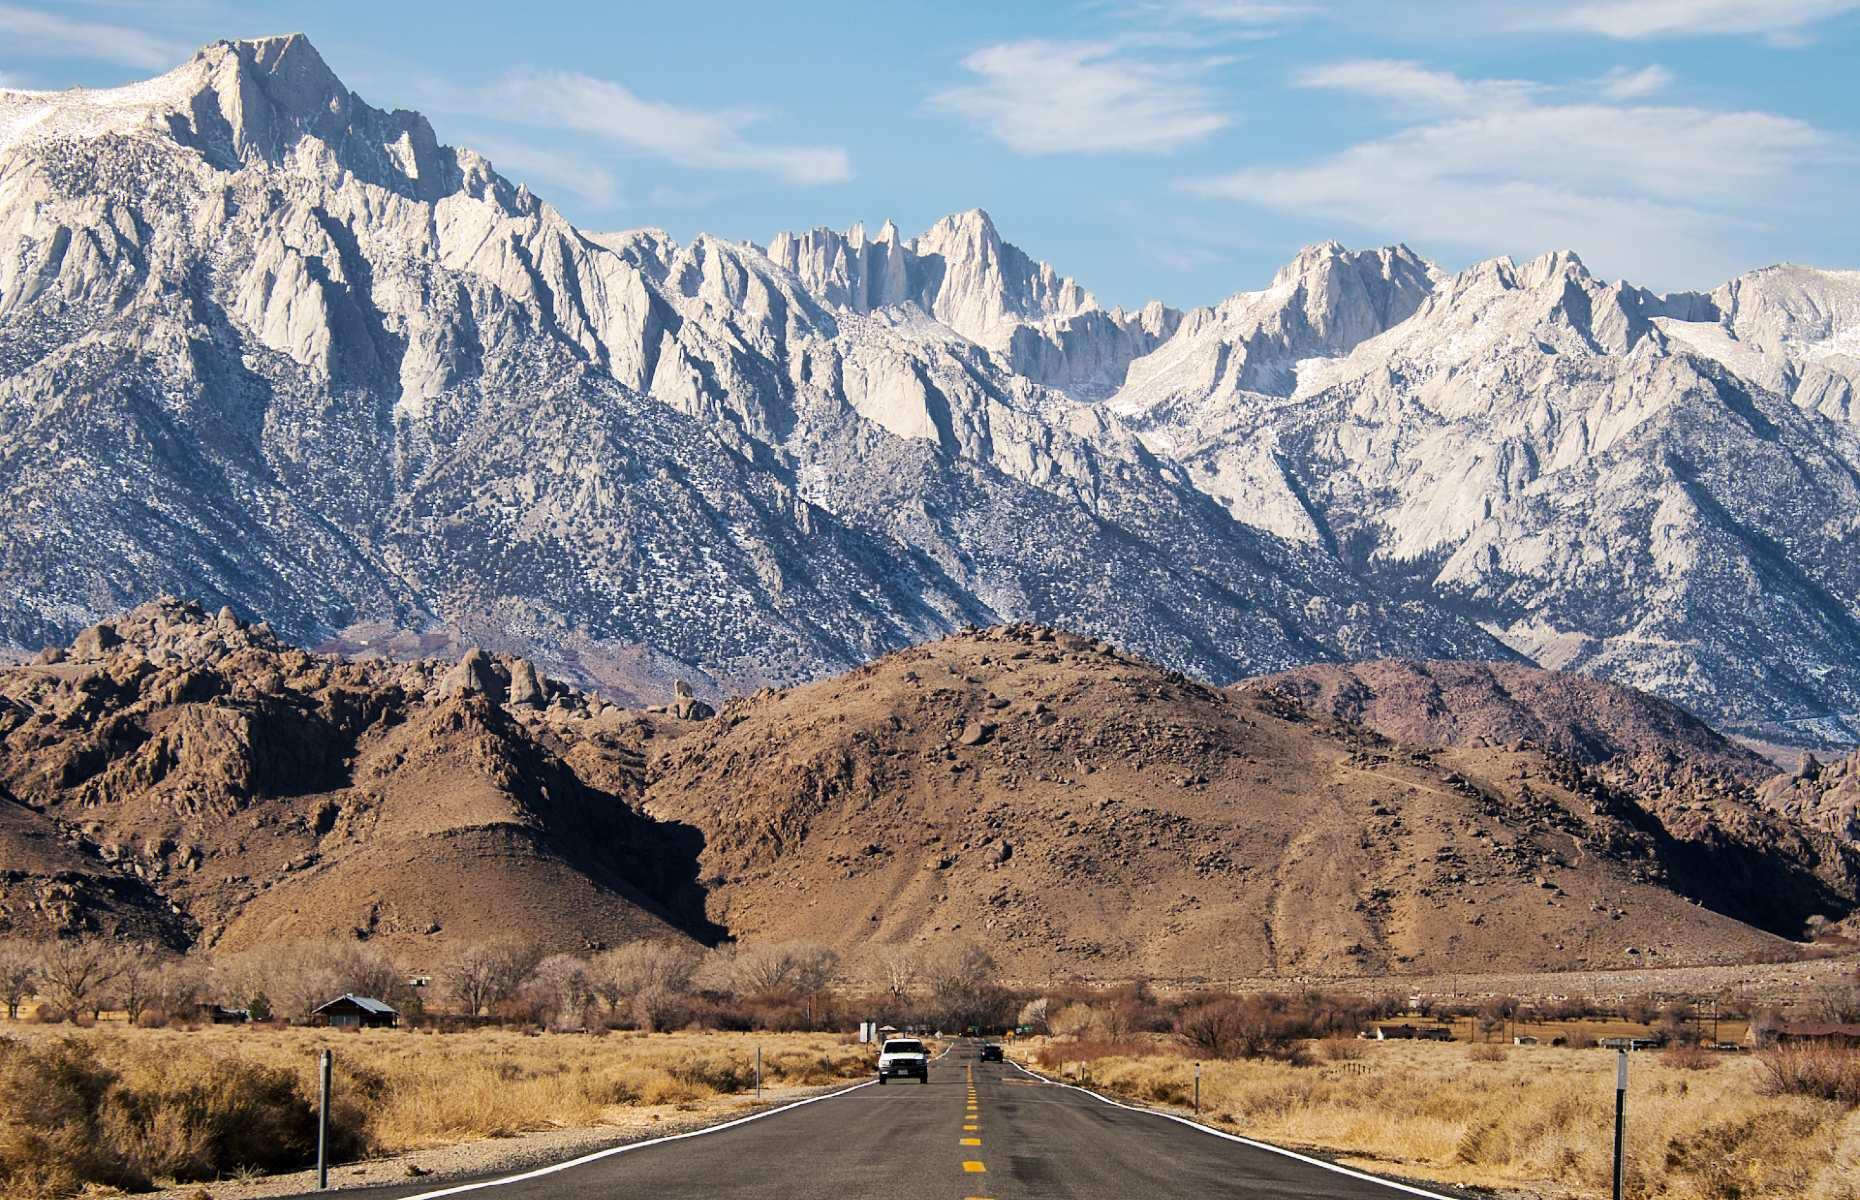 <p>One route that’s not to be missed in the Golden State is this beguiling journey between Lee Vining and Lone Pine, which follows Highway 395 as it winds its ways through the Sierras. The 155-mile (250km) trip could be completed in a few hours, but you’ll want to leave at least a day or two to explore. Starting at the town of Lee Vining, which sits on the shores of Mono Lake, make sure you have a wander around this spellbinding lake and get a look at its mysterious limestone tufas before strapping in and hitting the road. </p>